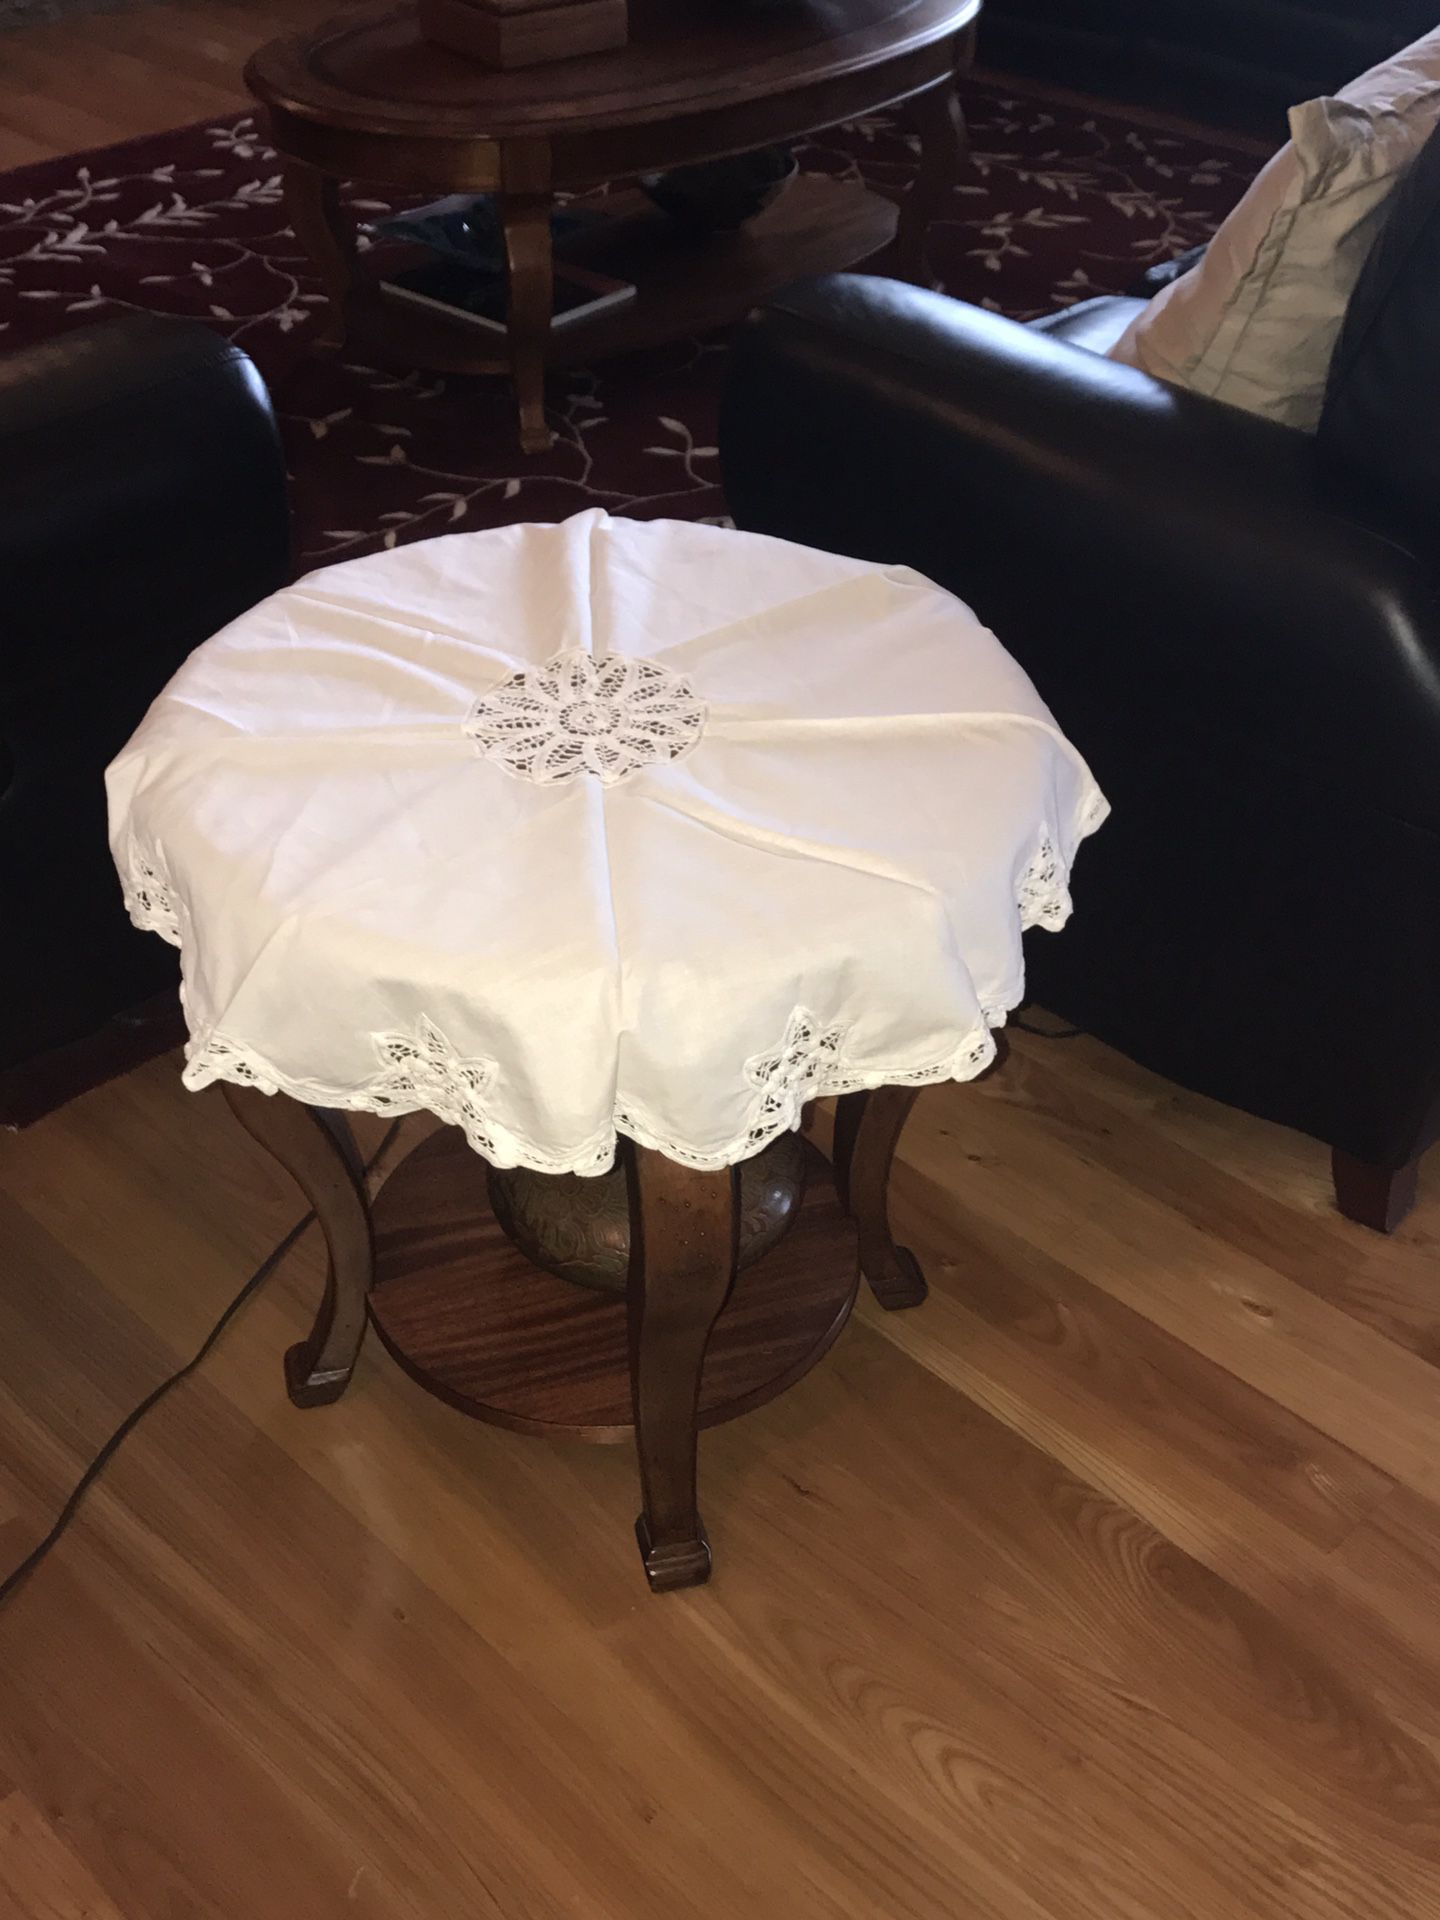 Antique Table Covering With beautifully cutout designs around the edges white round